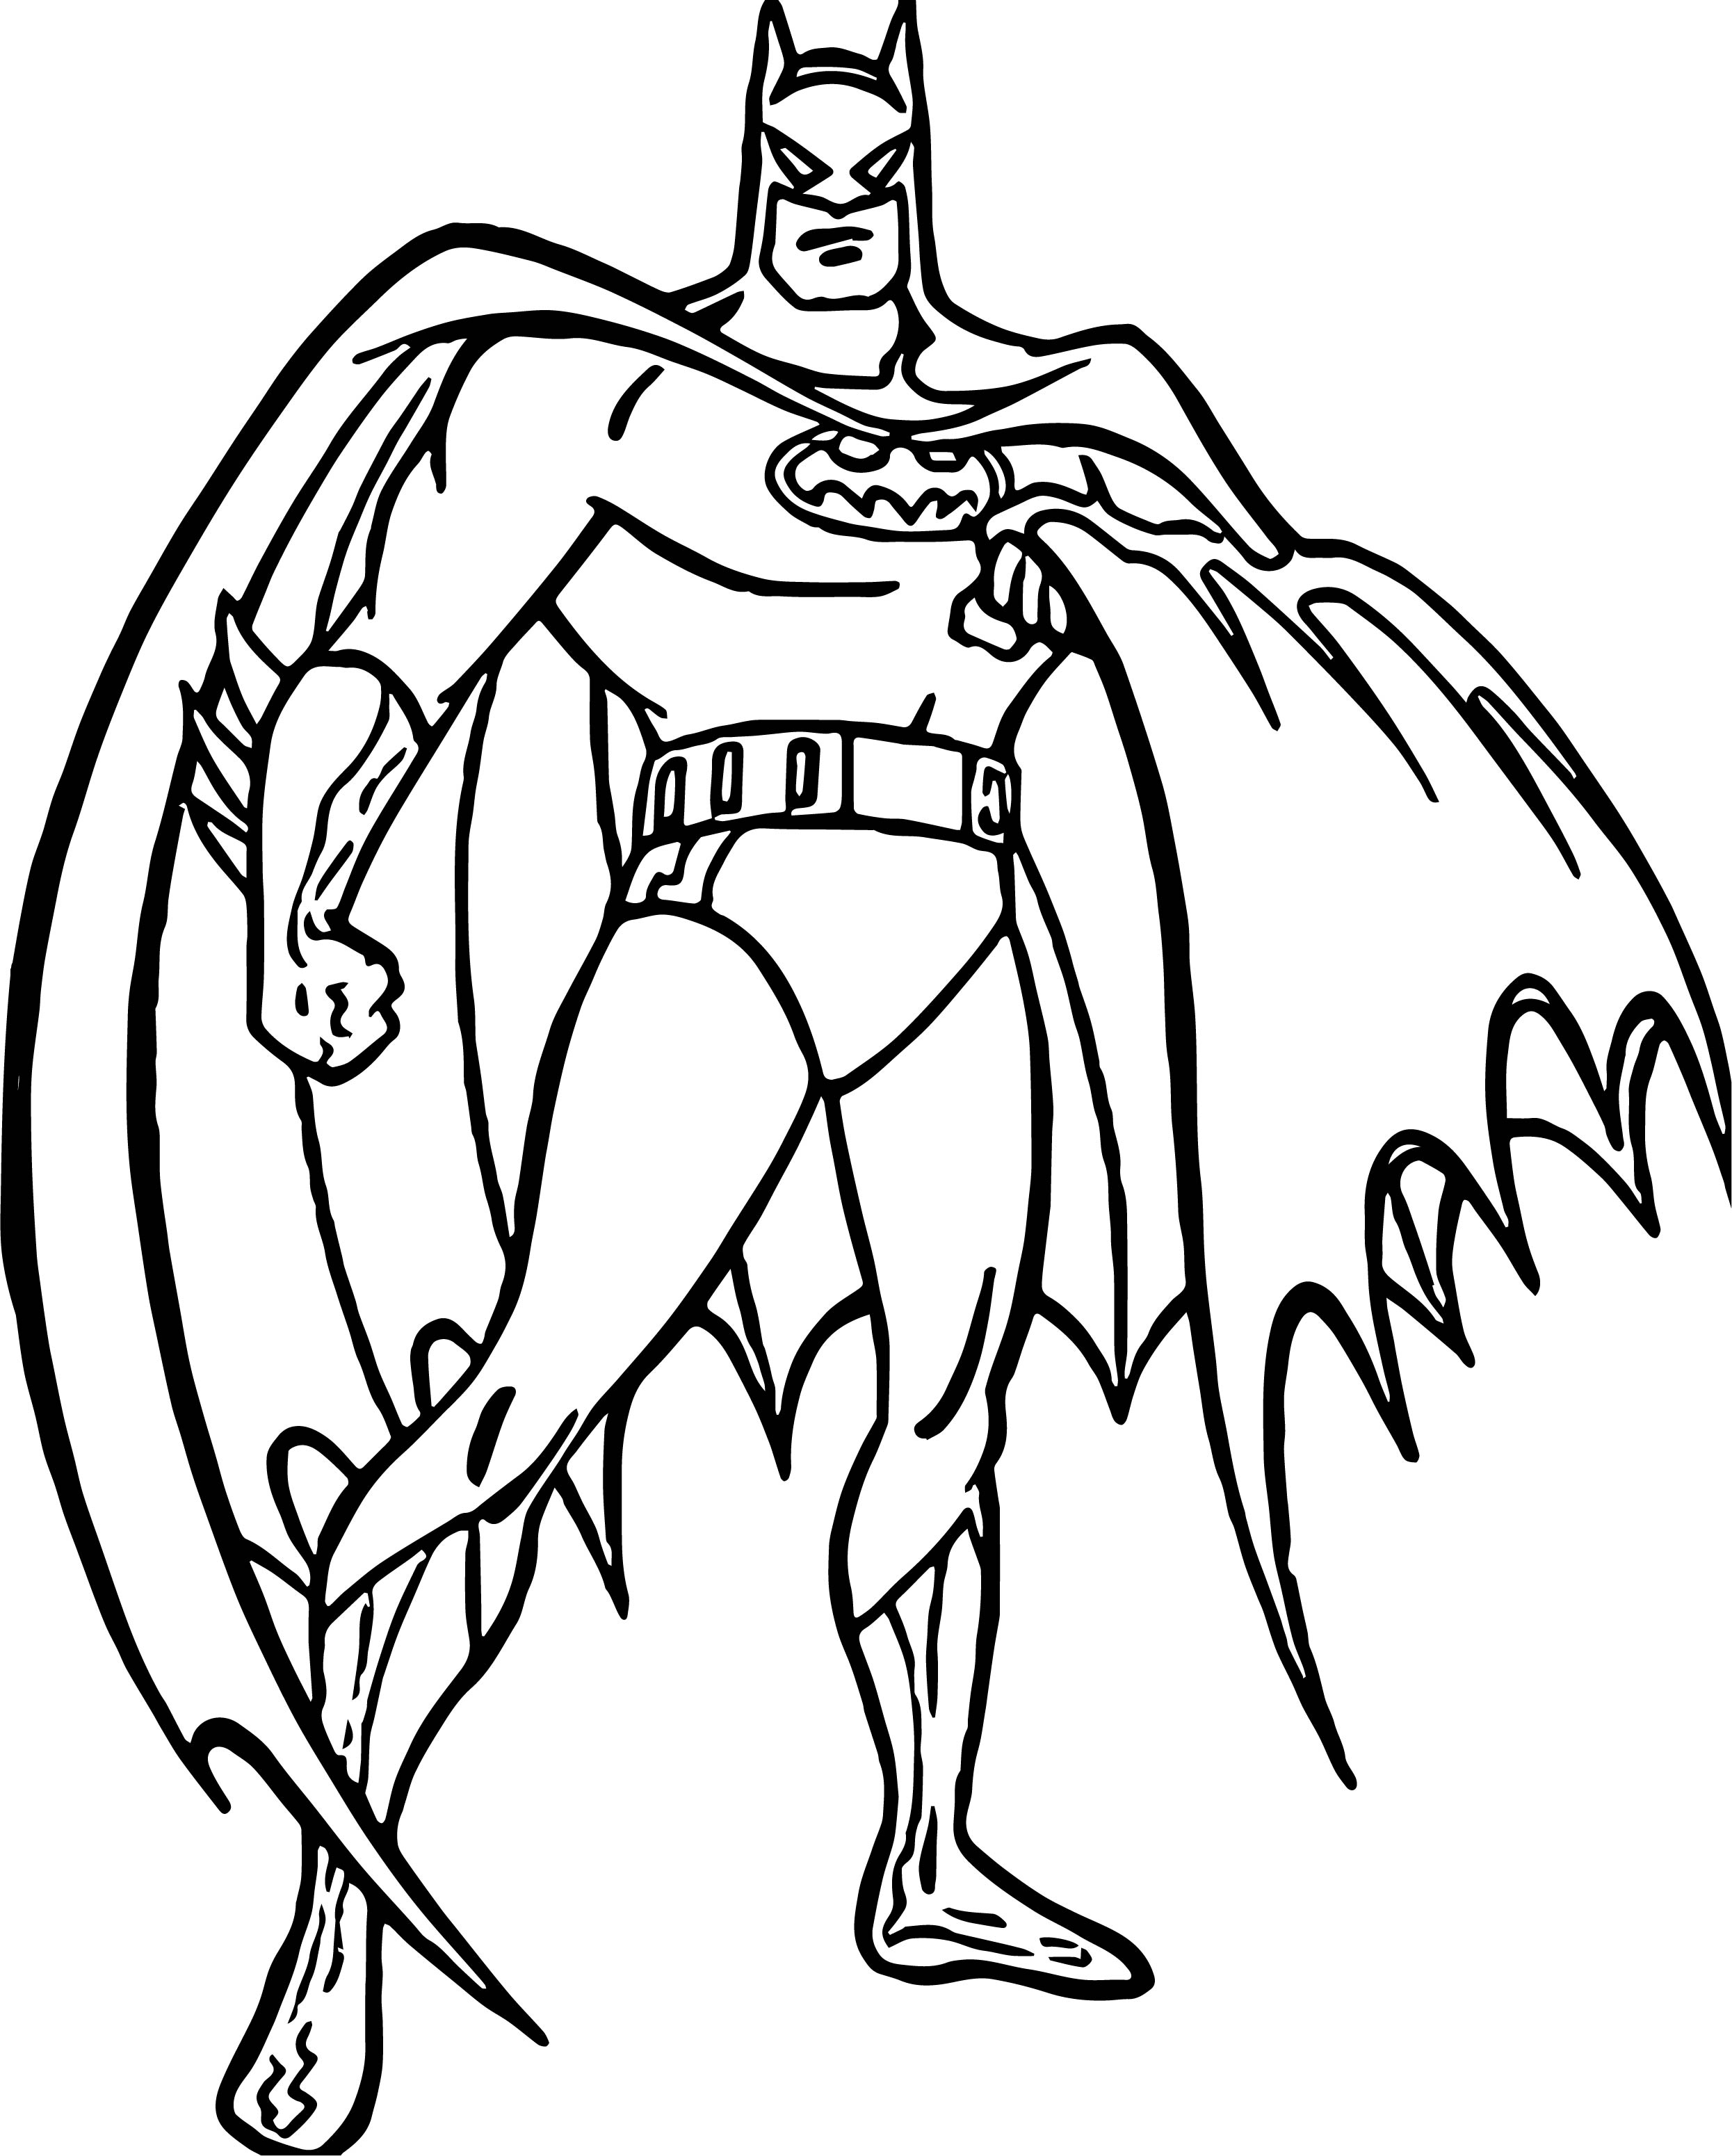 Batman Outline Drawing | Free download on ClipArtMag